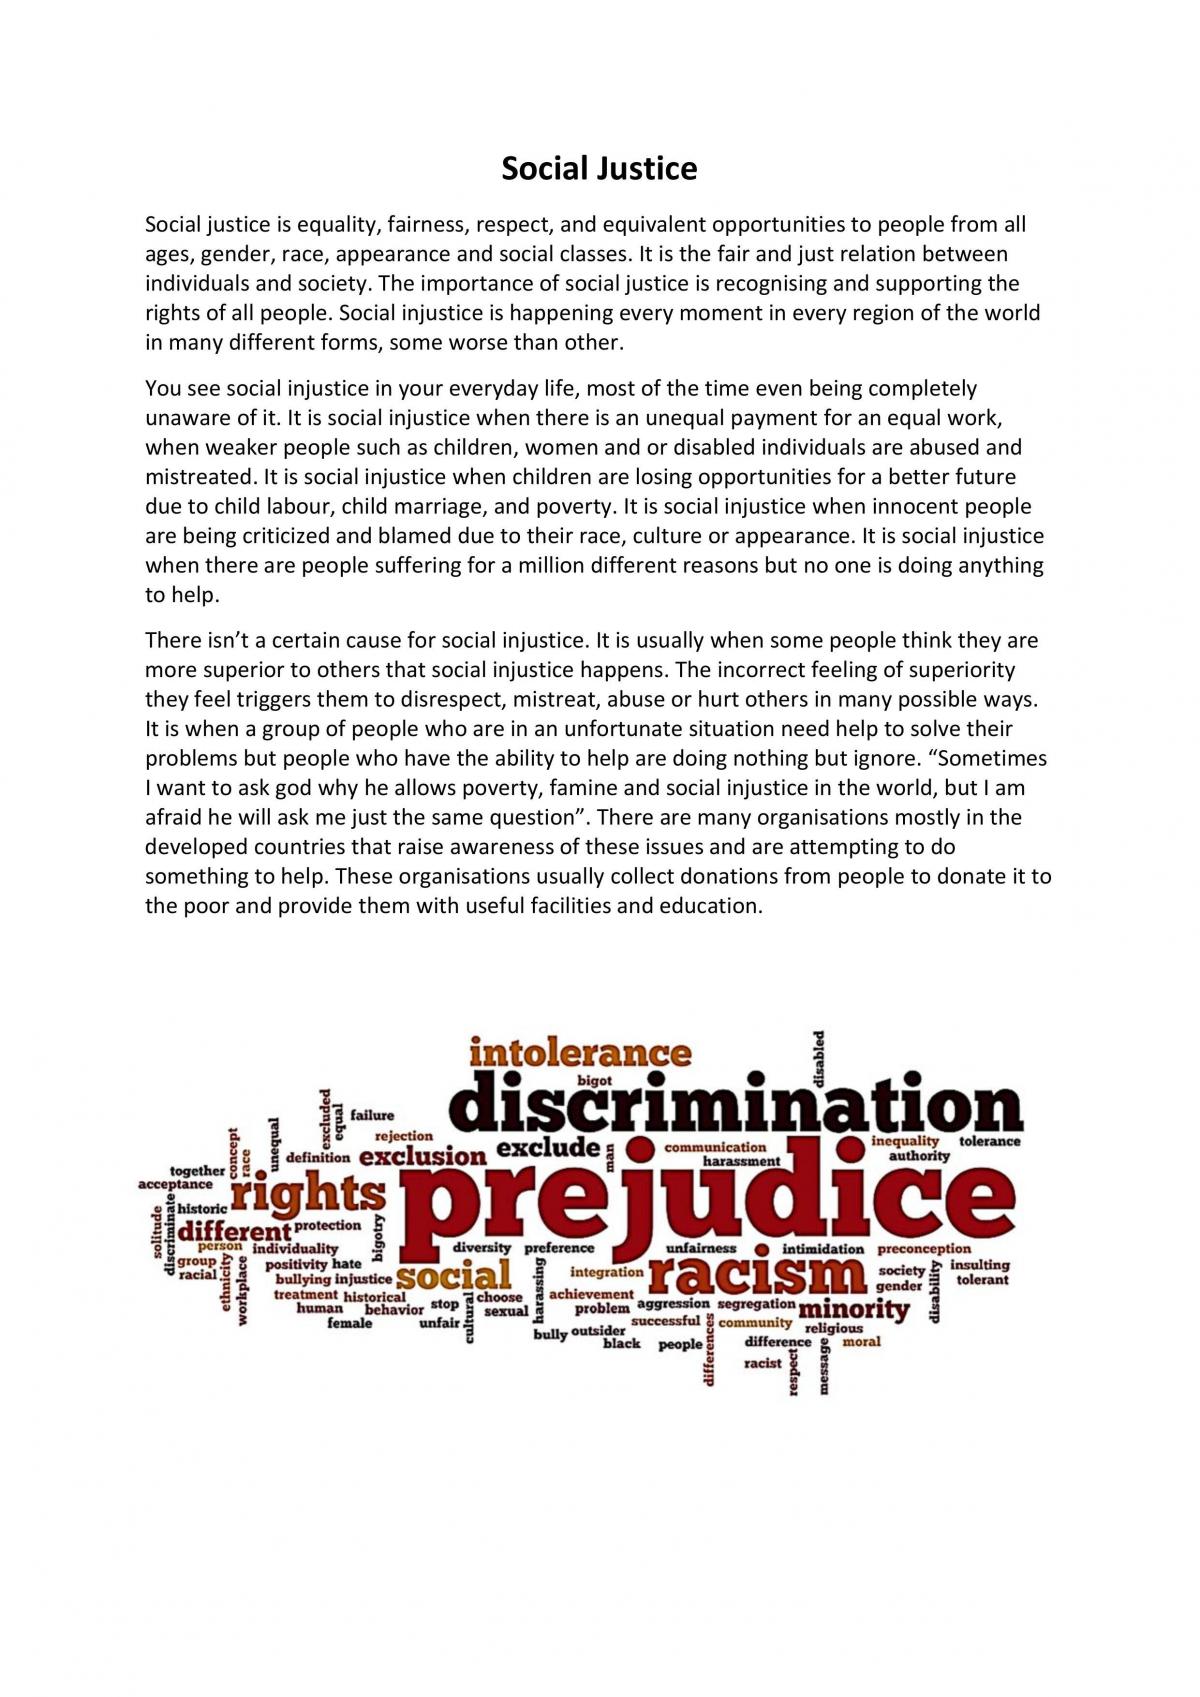 social injustice in the world essay